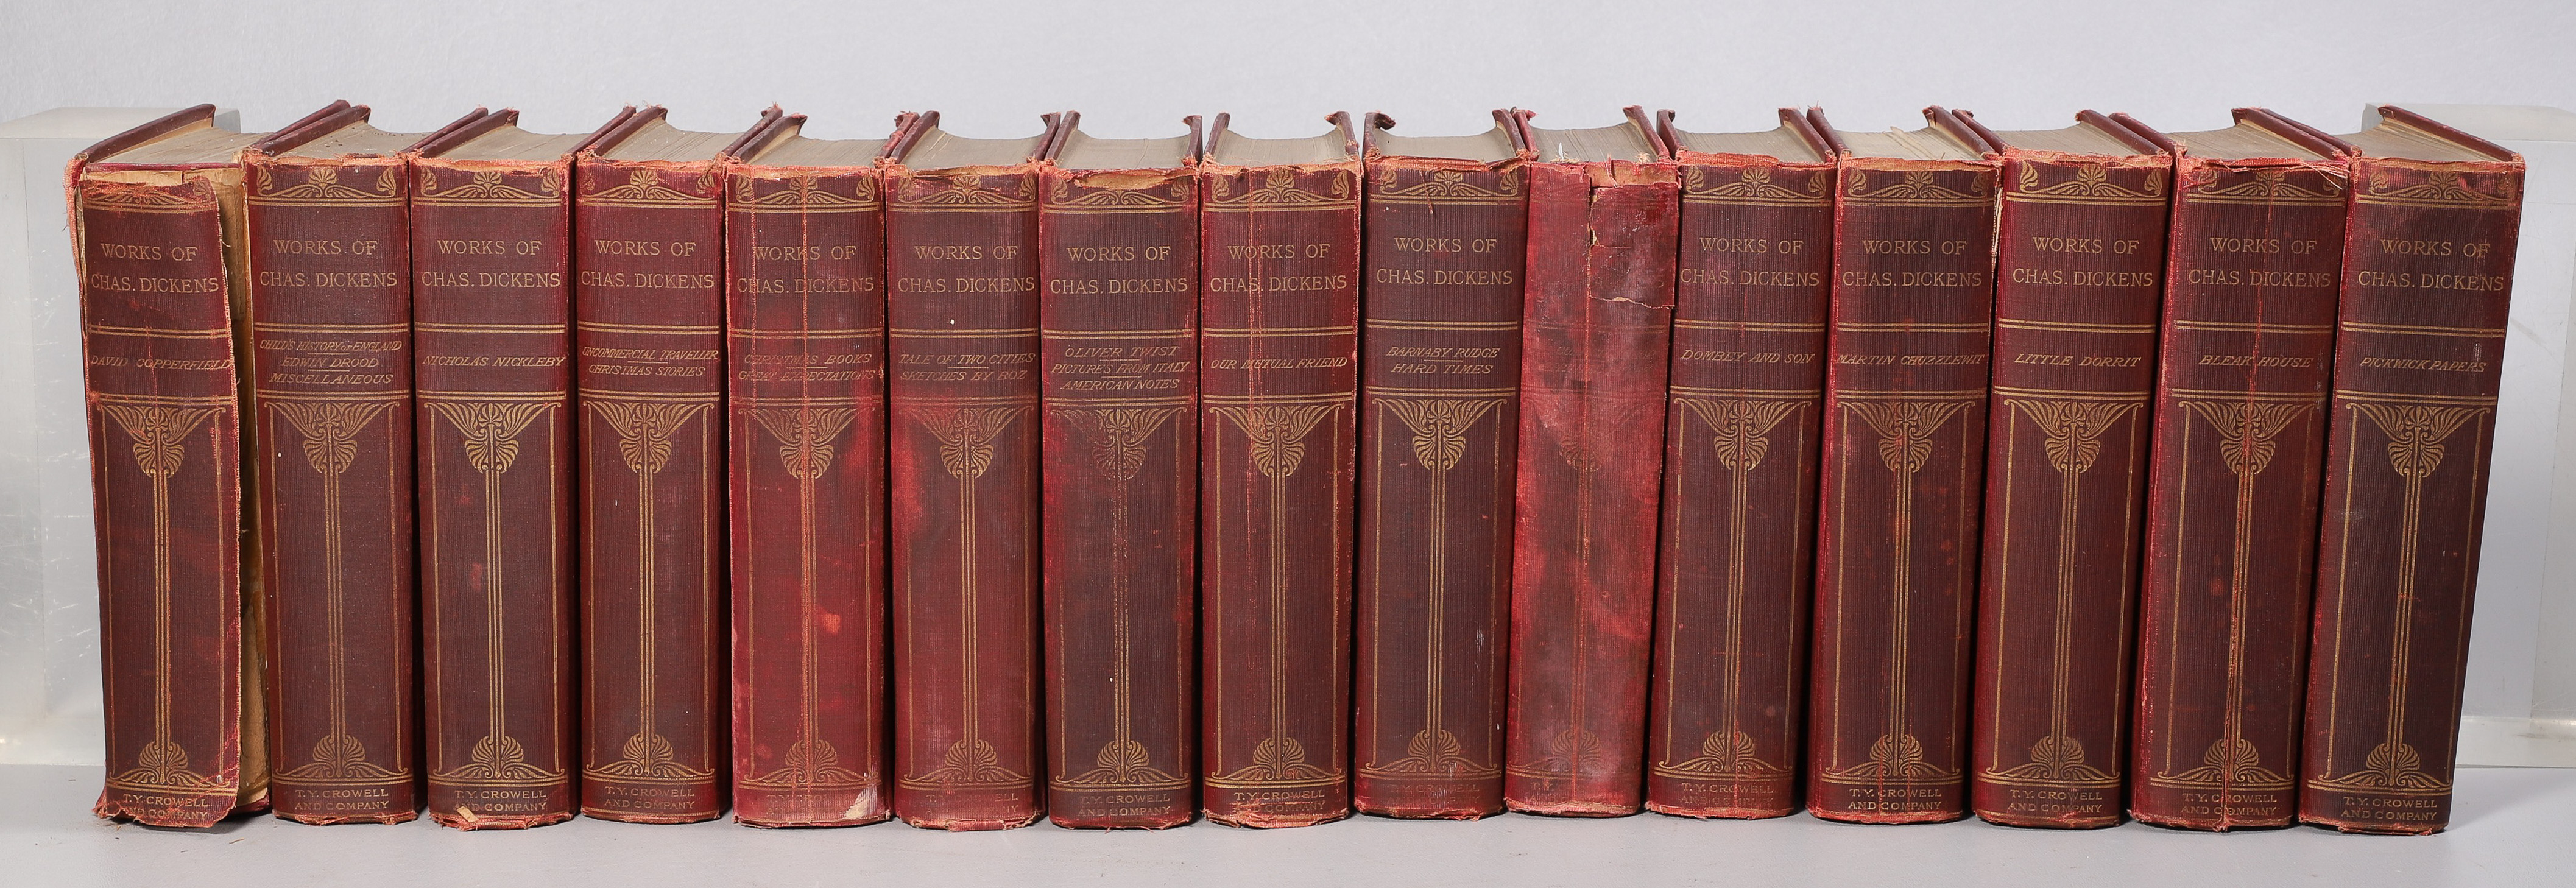 Fifteen volumes of the Works of Charles